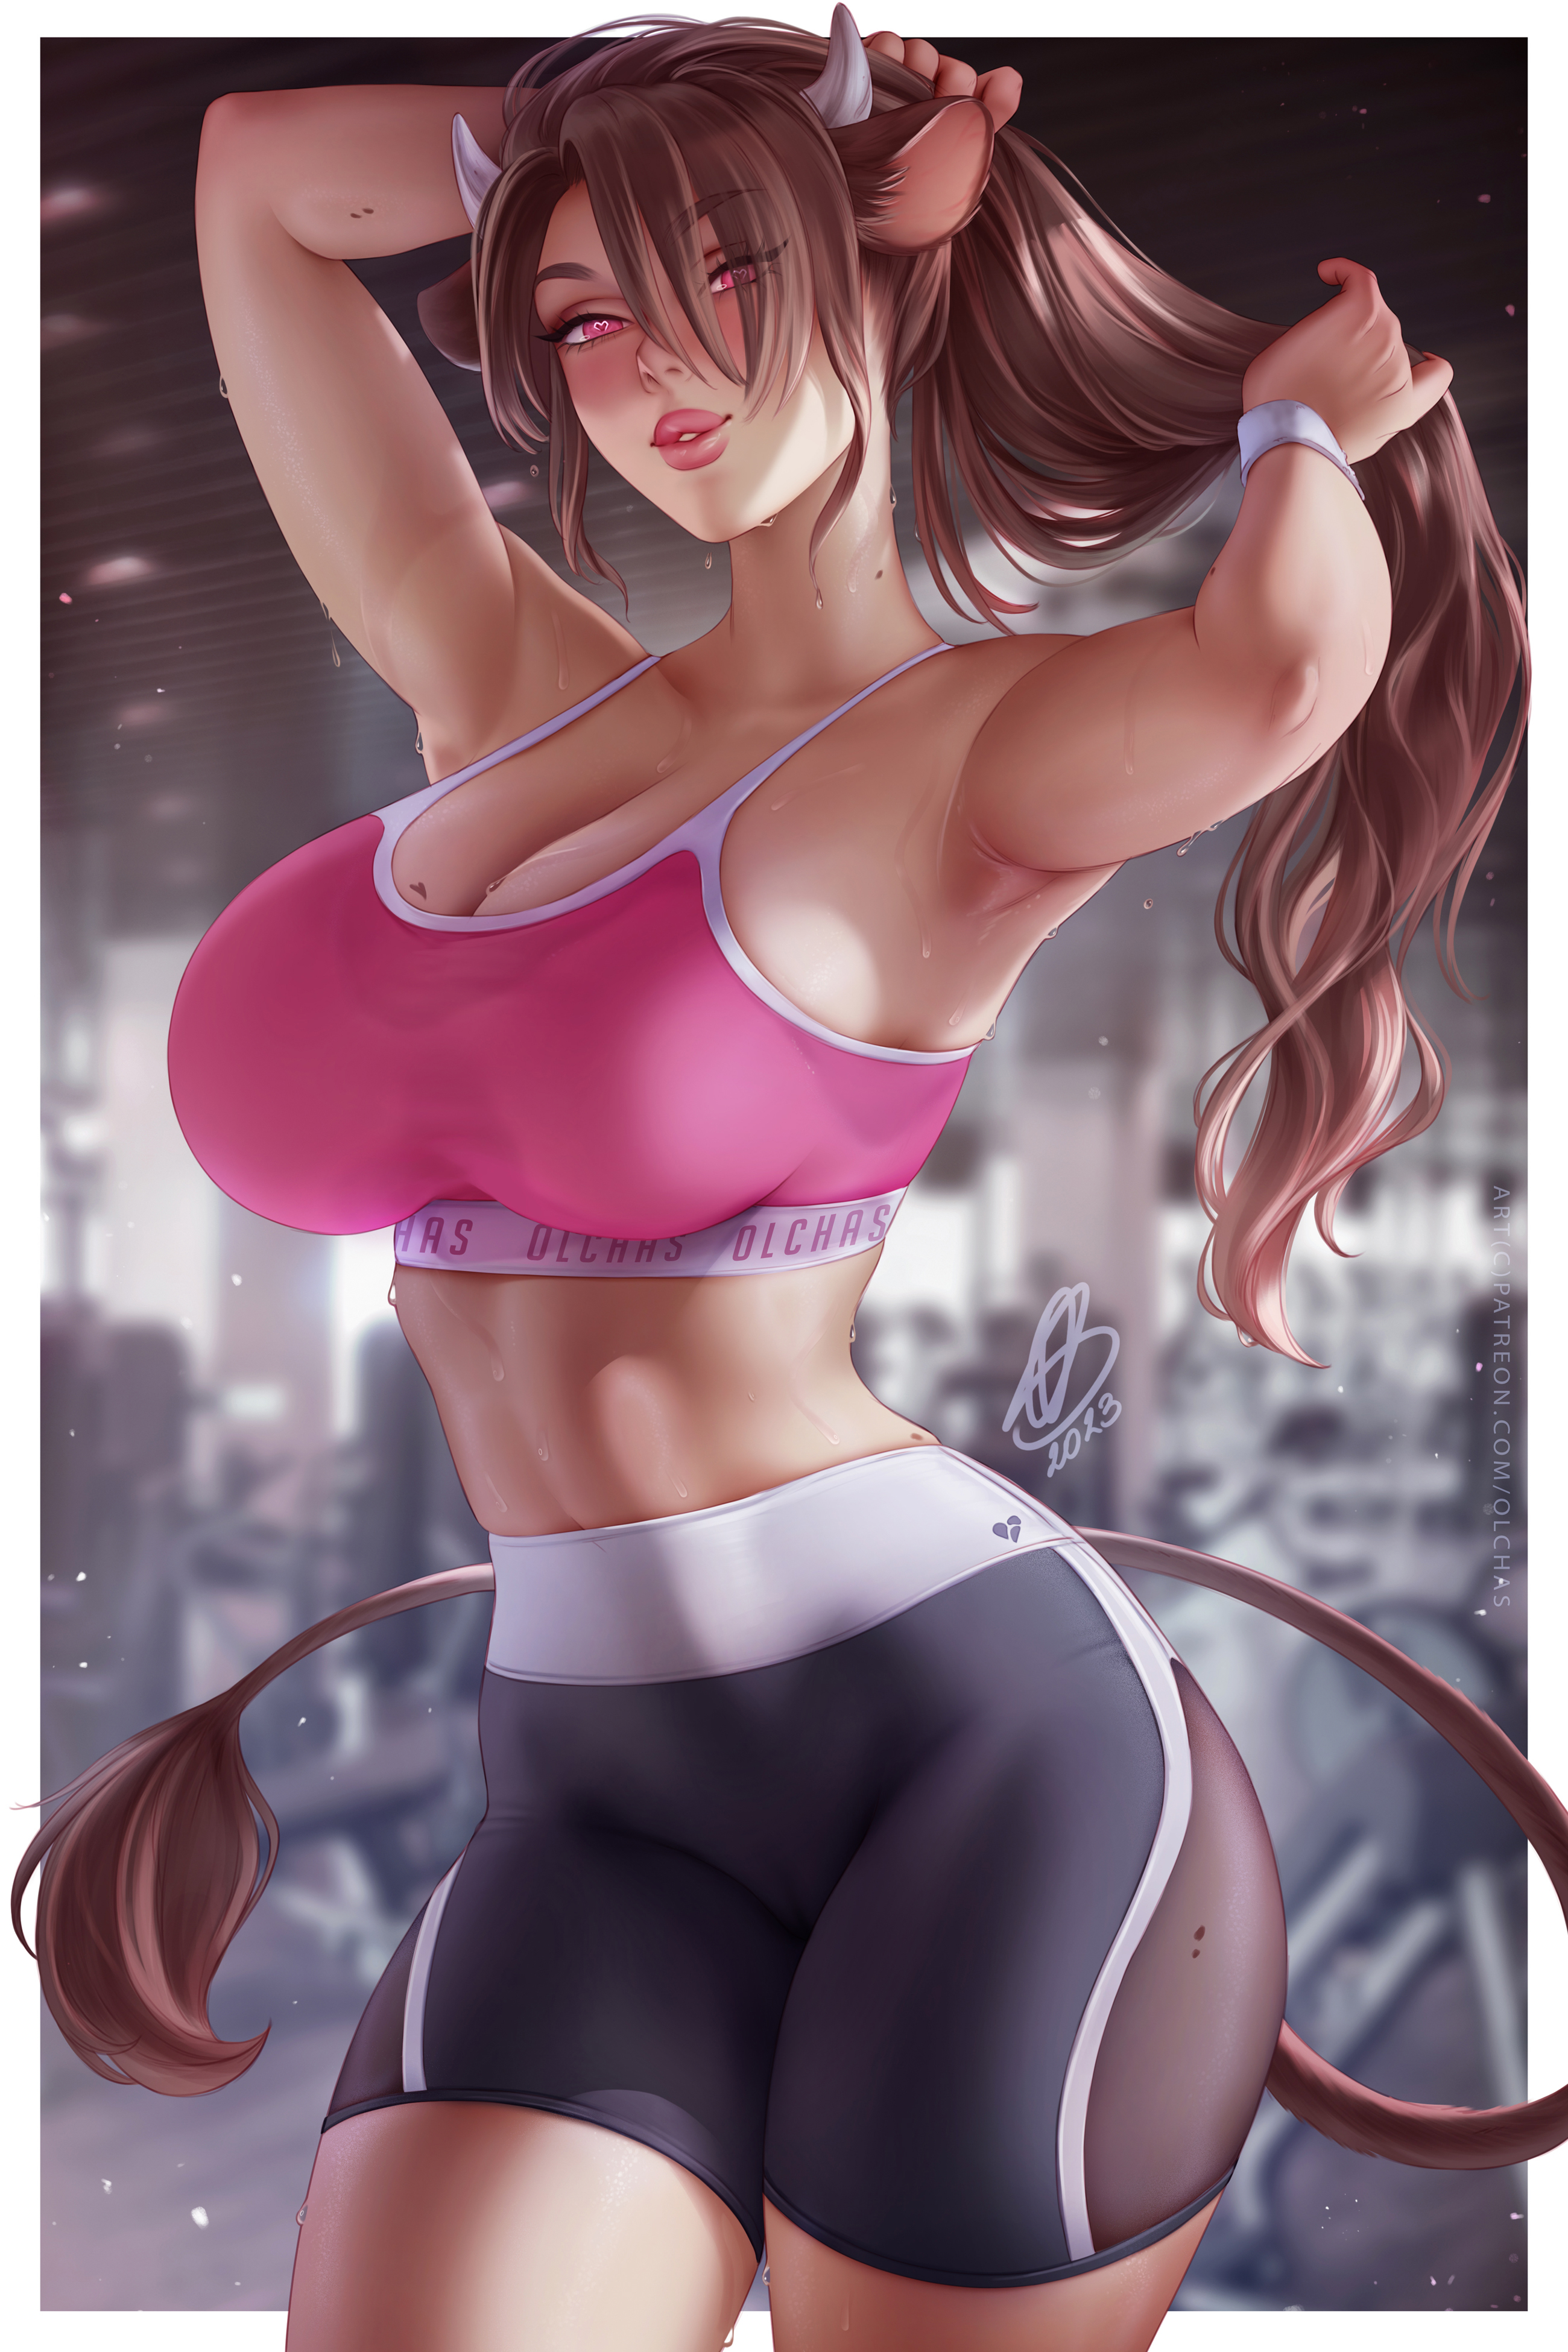 General 2600x3900 Mui (OC) original characters fantasy girl cow girl animal ears gyms sportswear artwork drawing OlchaS sweat portrait display long hair looking at viewer Cow tail armpits sports bra sports shorts big boobs watermarked sweaty body